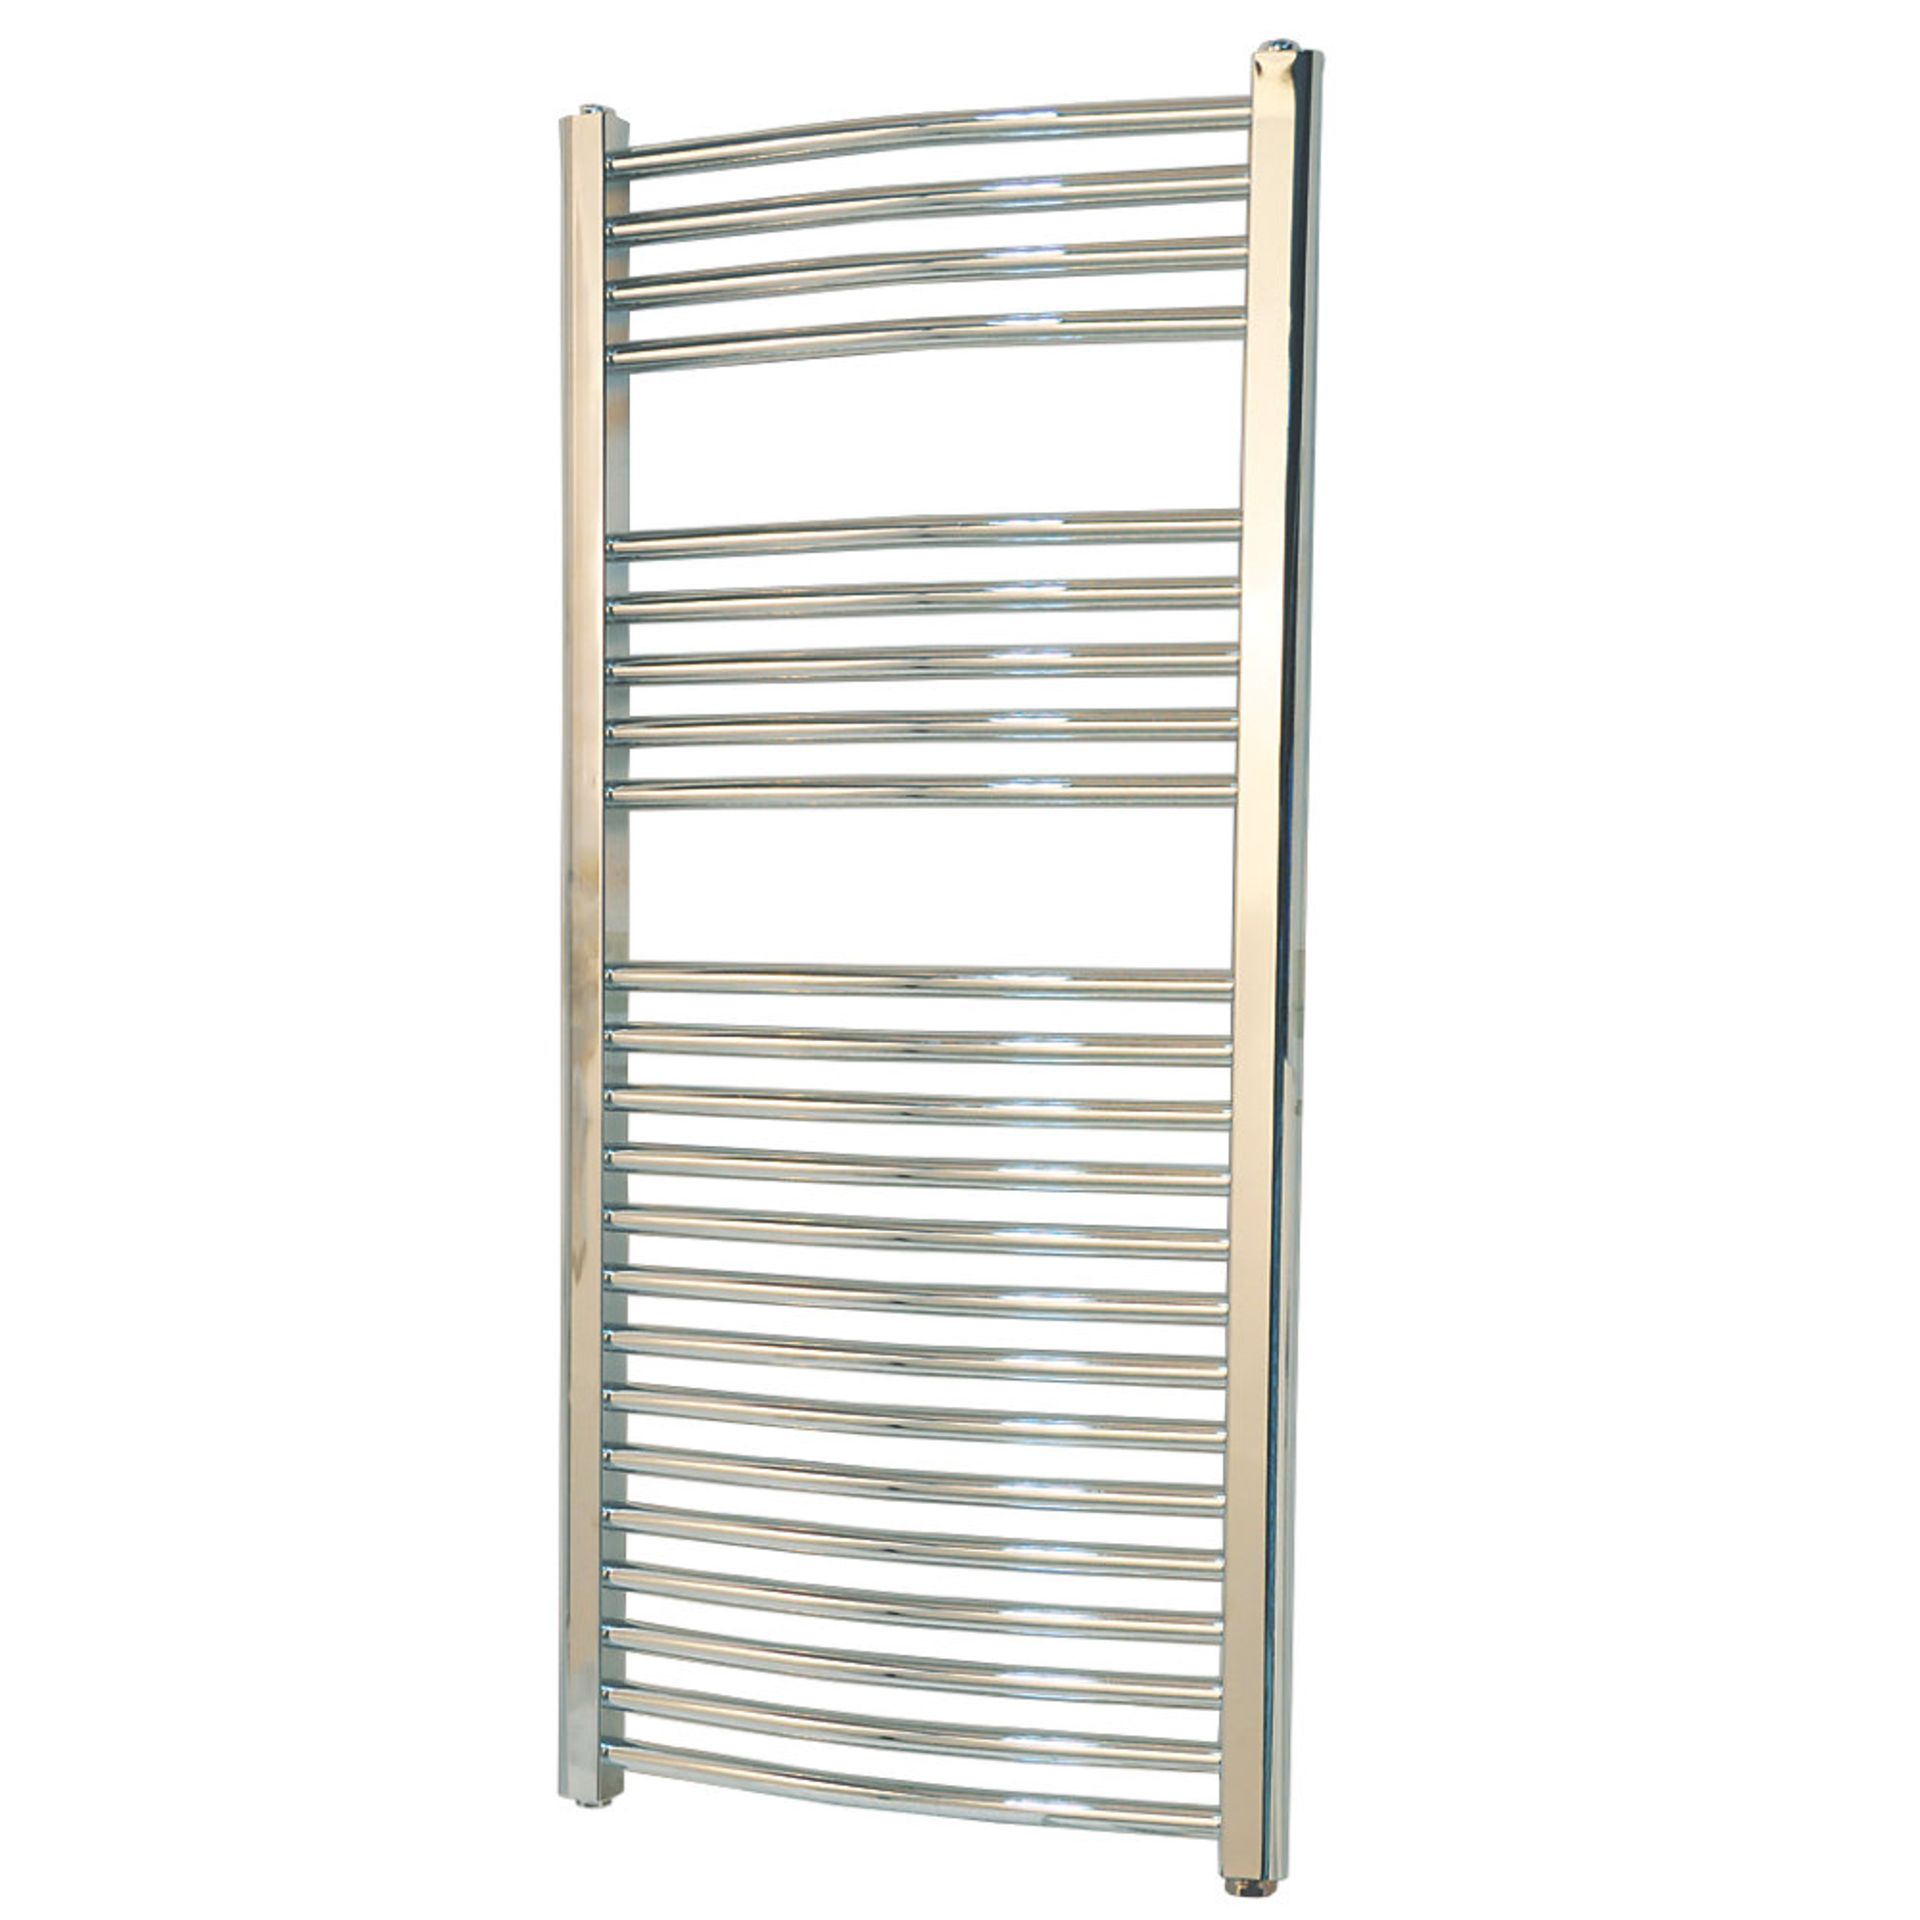 (H34) 1100x500mm FLOMASTA CURVED ELECTRIC TOWEL RADIATOR CHROME. Electrical installation only. ... - Image 4 of 5